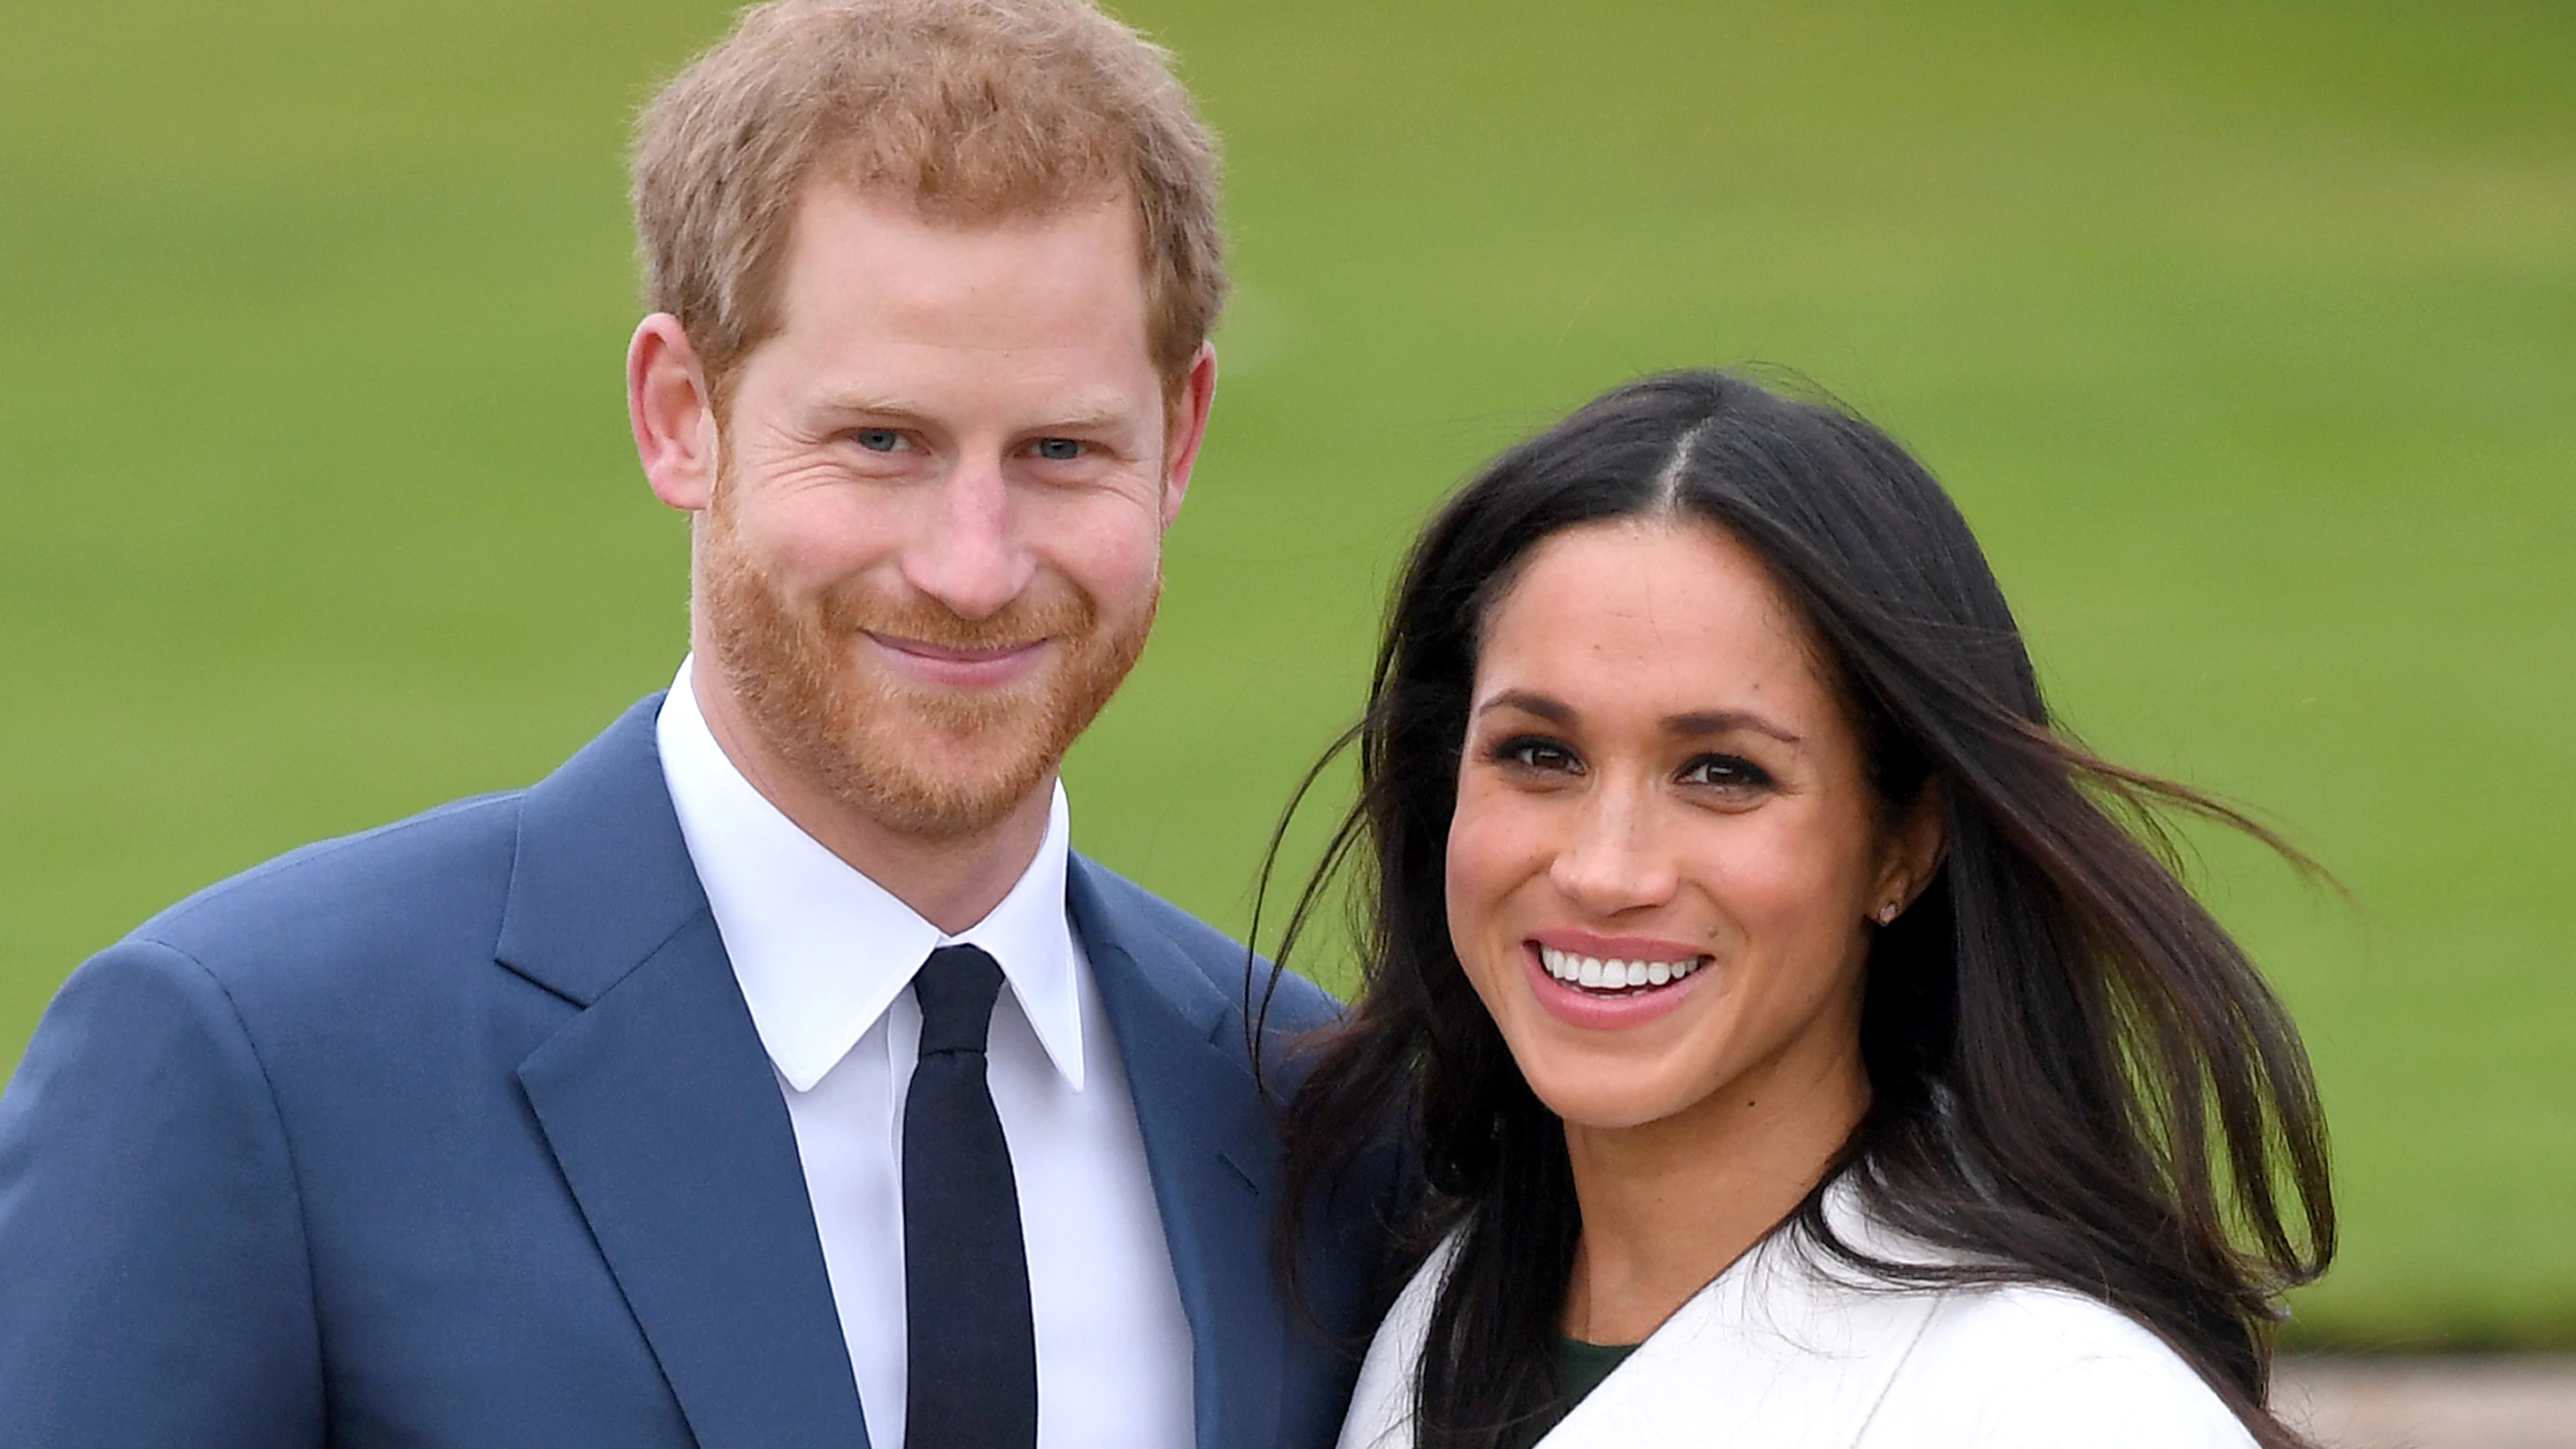 Meghan Markle and Prince Harry drop explosive bombs on Royal family in highly-anticipated tell-all